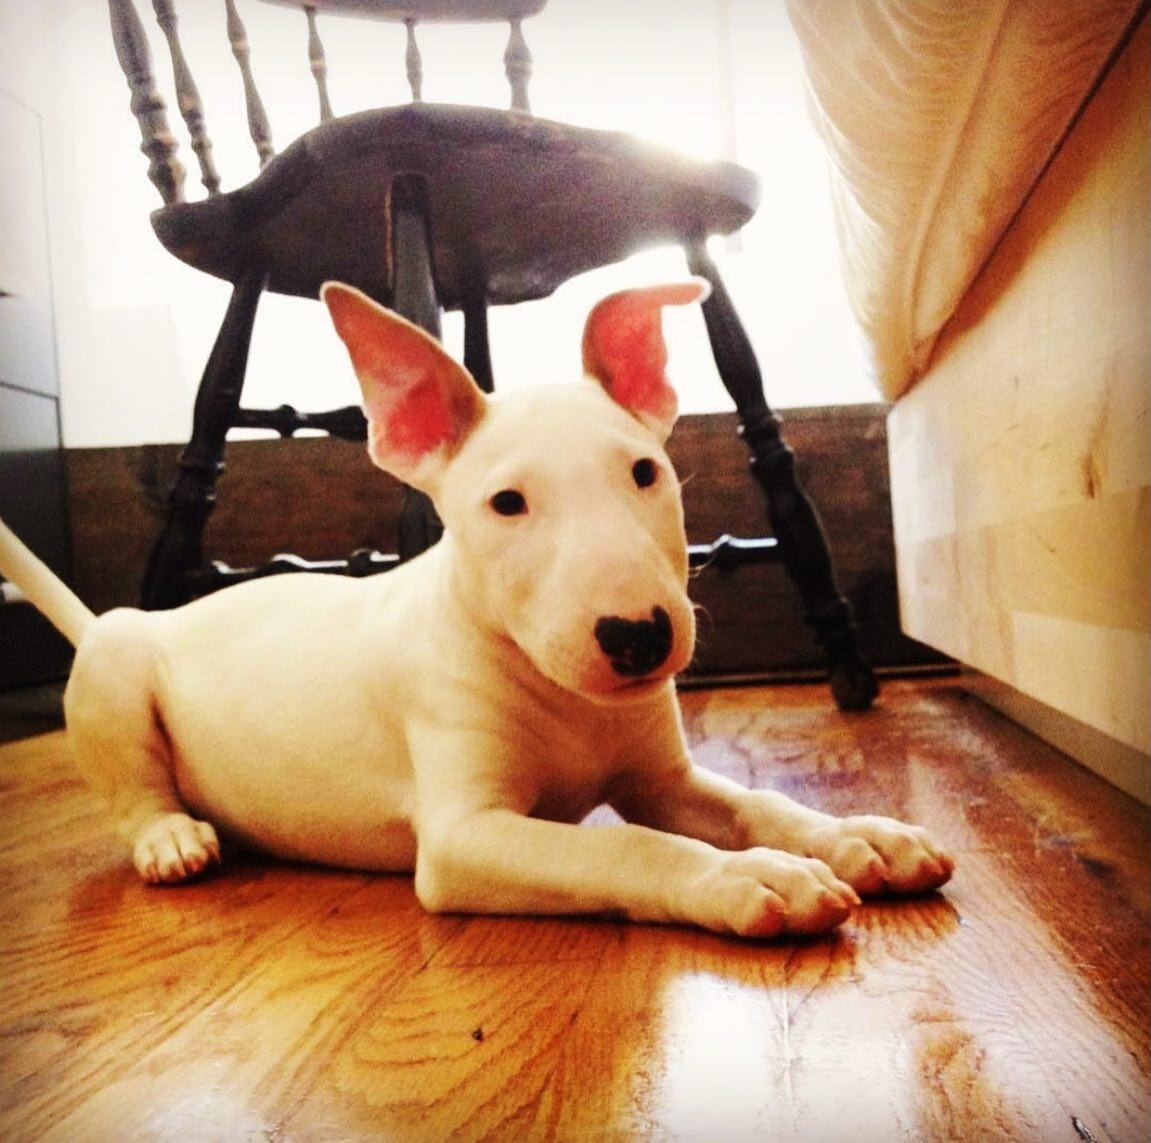 Happy International Puppy Day ❤️🐶 @isis.my.goddess was three months old when she came to me in 2013. Now I can&rsquo;t imagine a life without her. #internationalpuppyday #bullterrierlove #bullterriersofinstagram #nycartists #nycbully